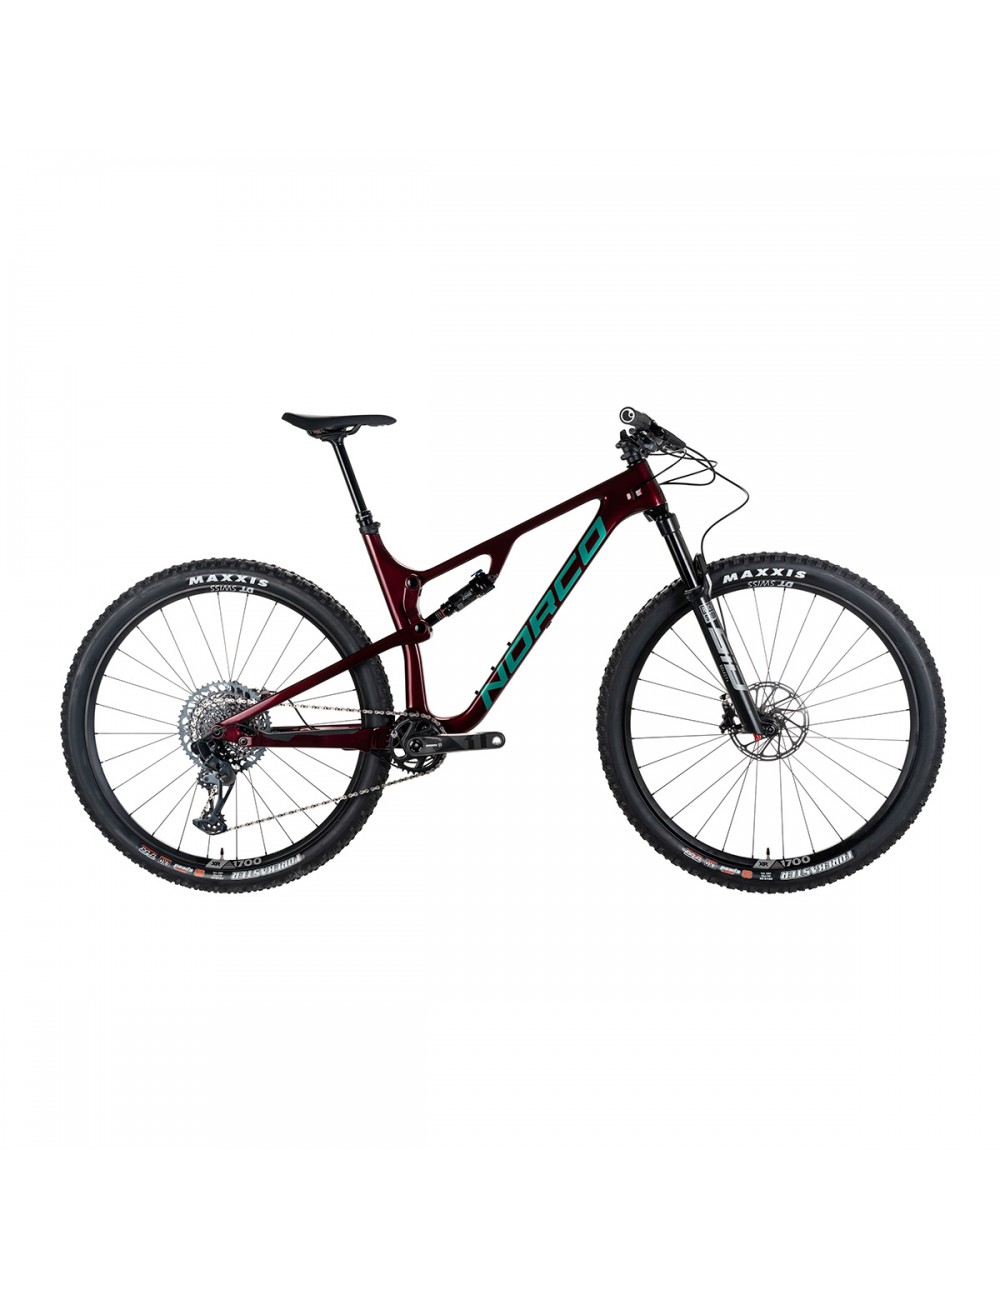 Norco Revolver C9.1 120  Bike - Red/Green_13333